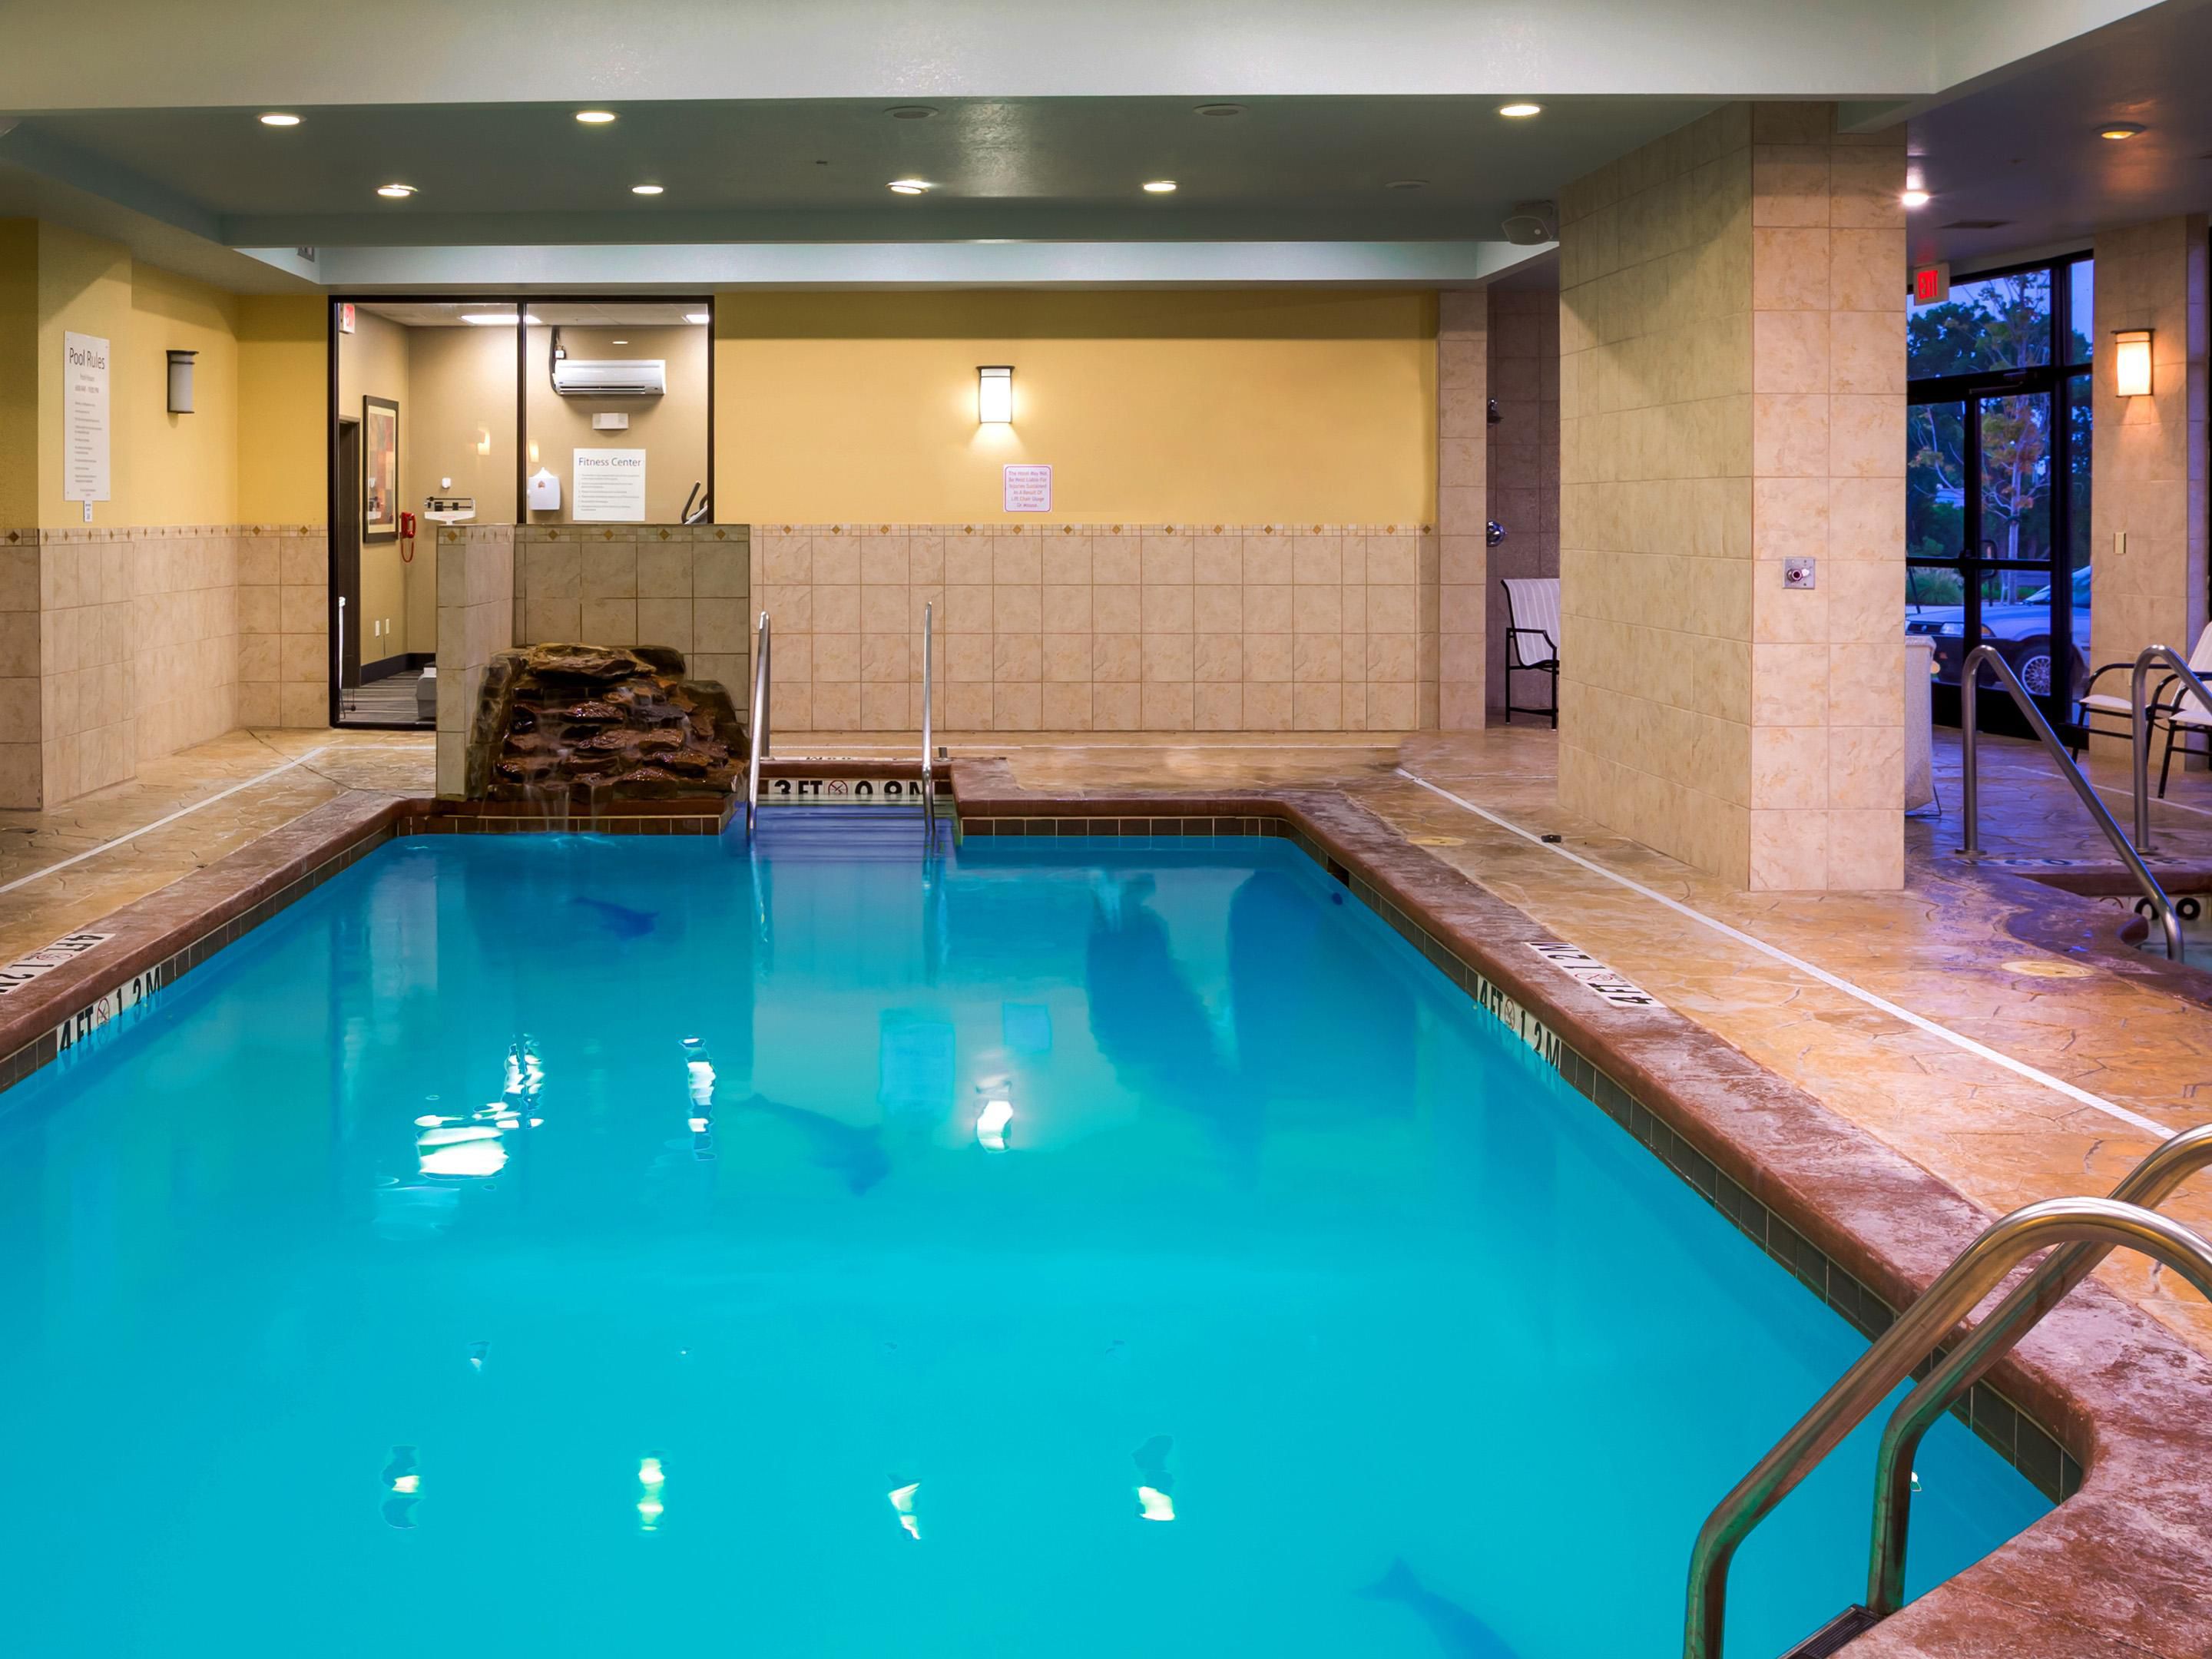 Get your workout in or unwind after a productive day in the OKC area with a dip in our indoor pool. We offer plenty of poolside seating and towels. Our fitness facilities also include a 24-hour gym with cardio machines and free weights. No matter how long you're staying with us, we make it easy to maintain your workout routine during travel.